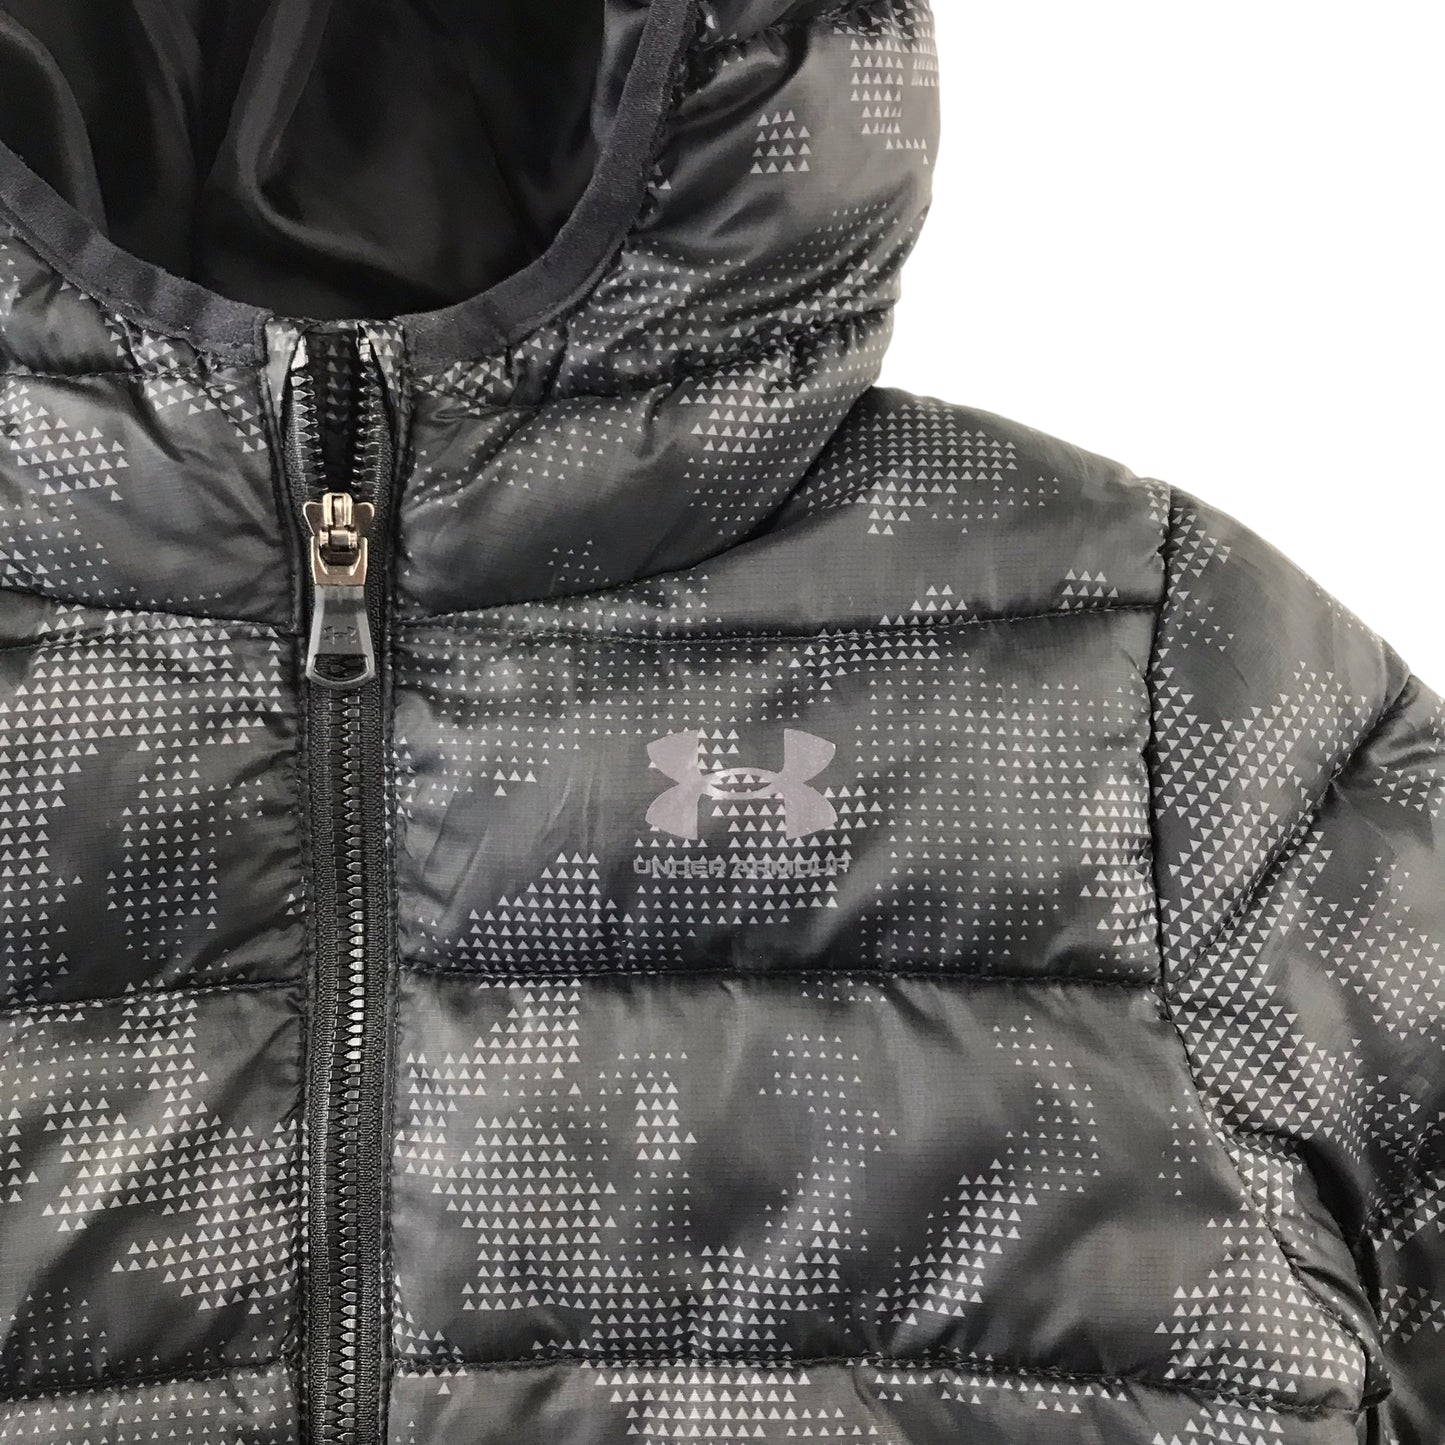 Under Armor Jacket Age 4 Black Loose Fit Camo Puffer